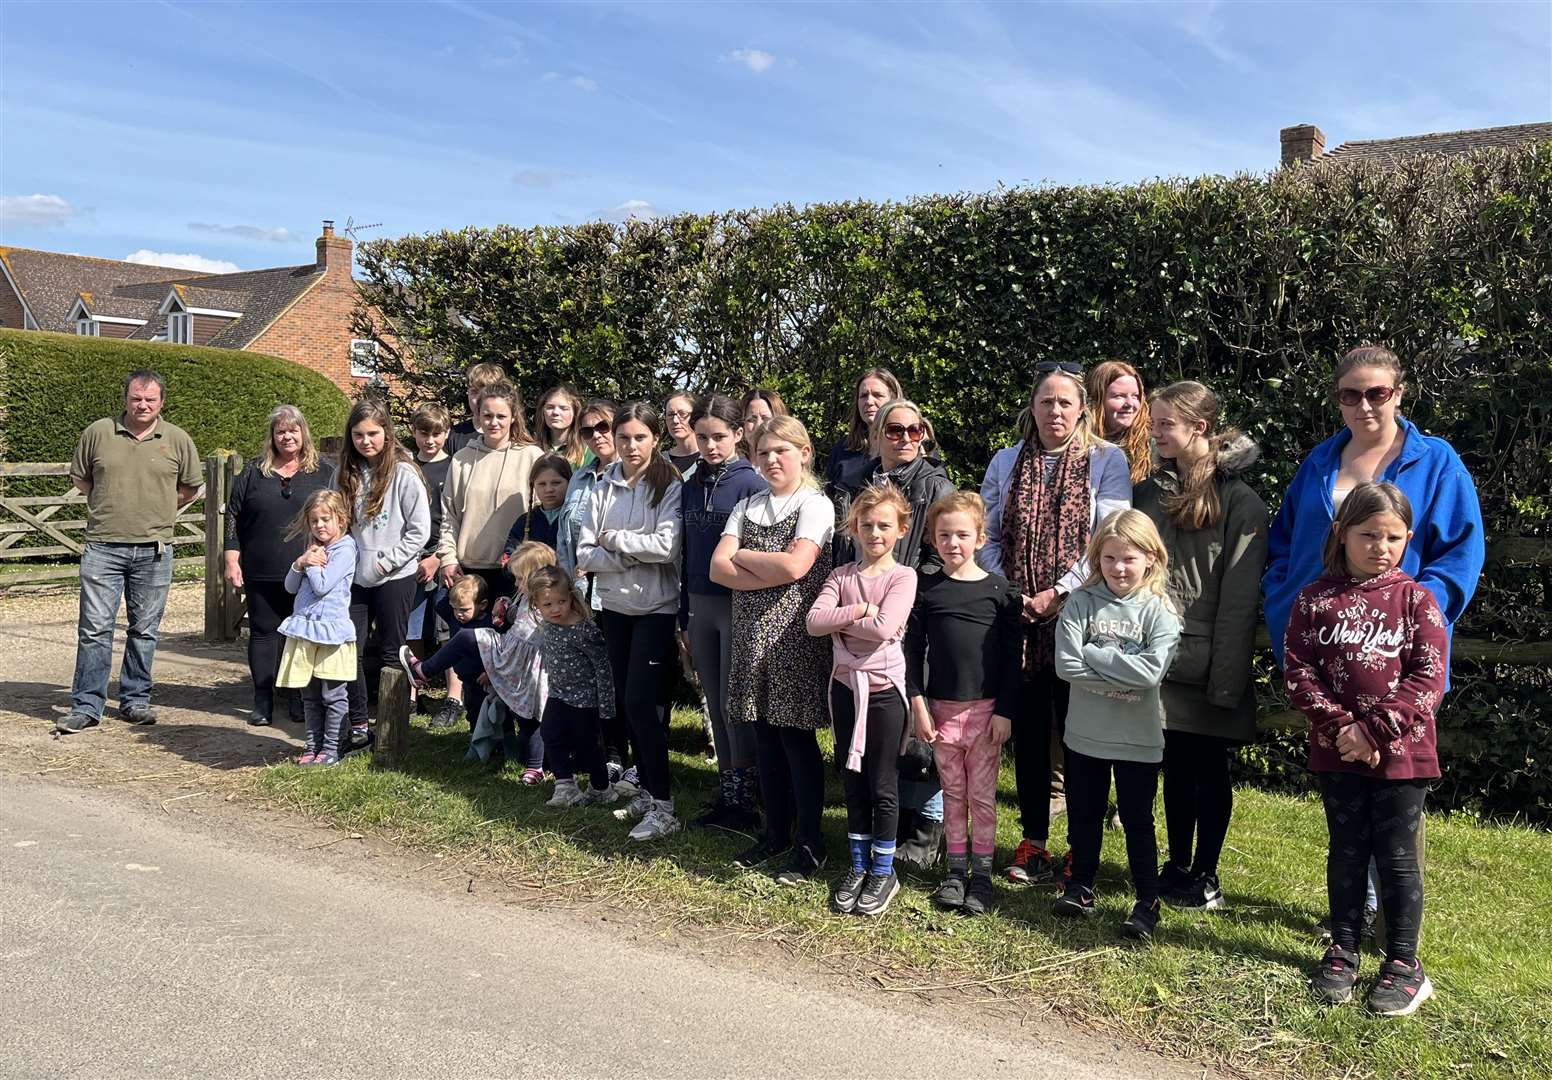 Families living in the Canterbury district are outraged by Stagecoach's planned bus cuts